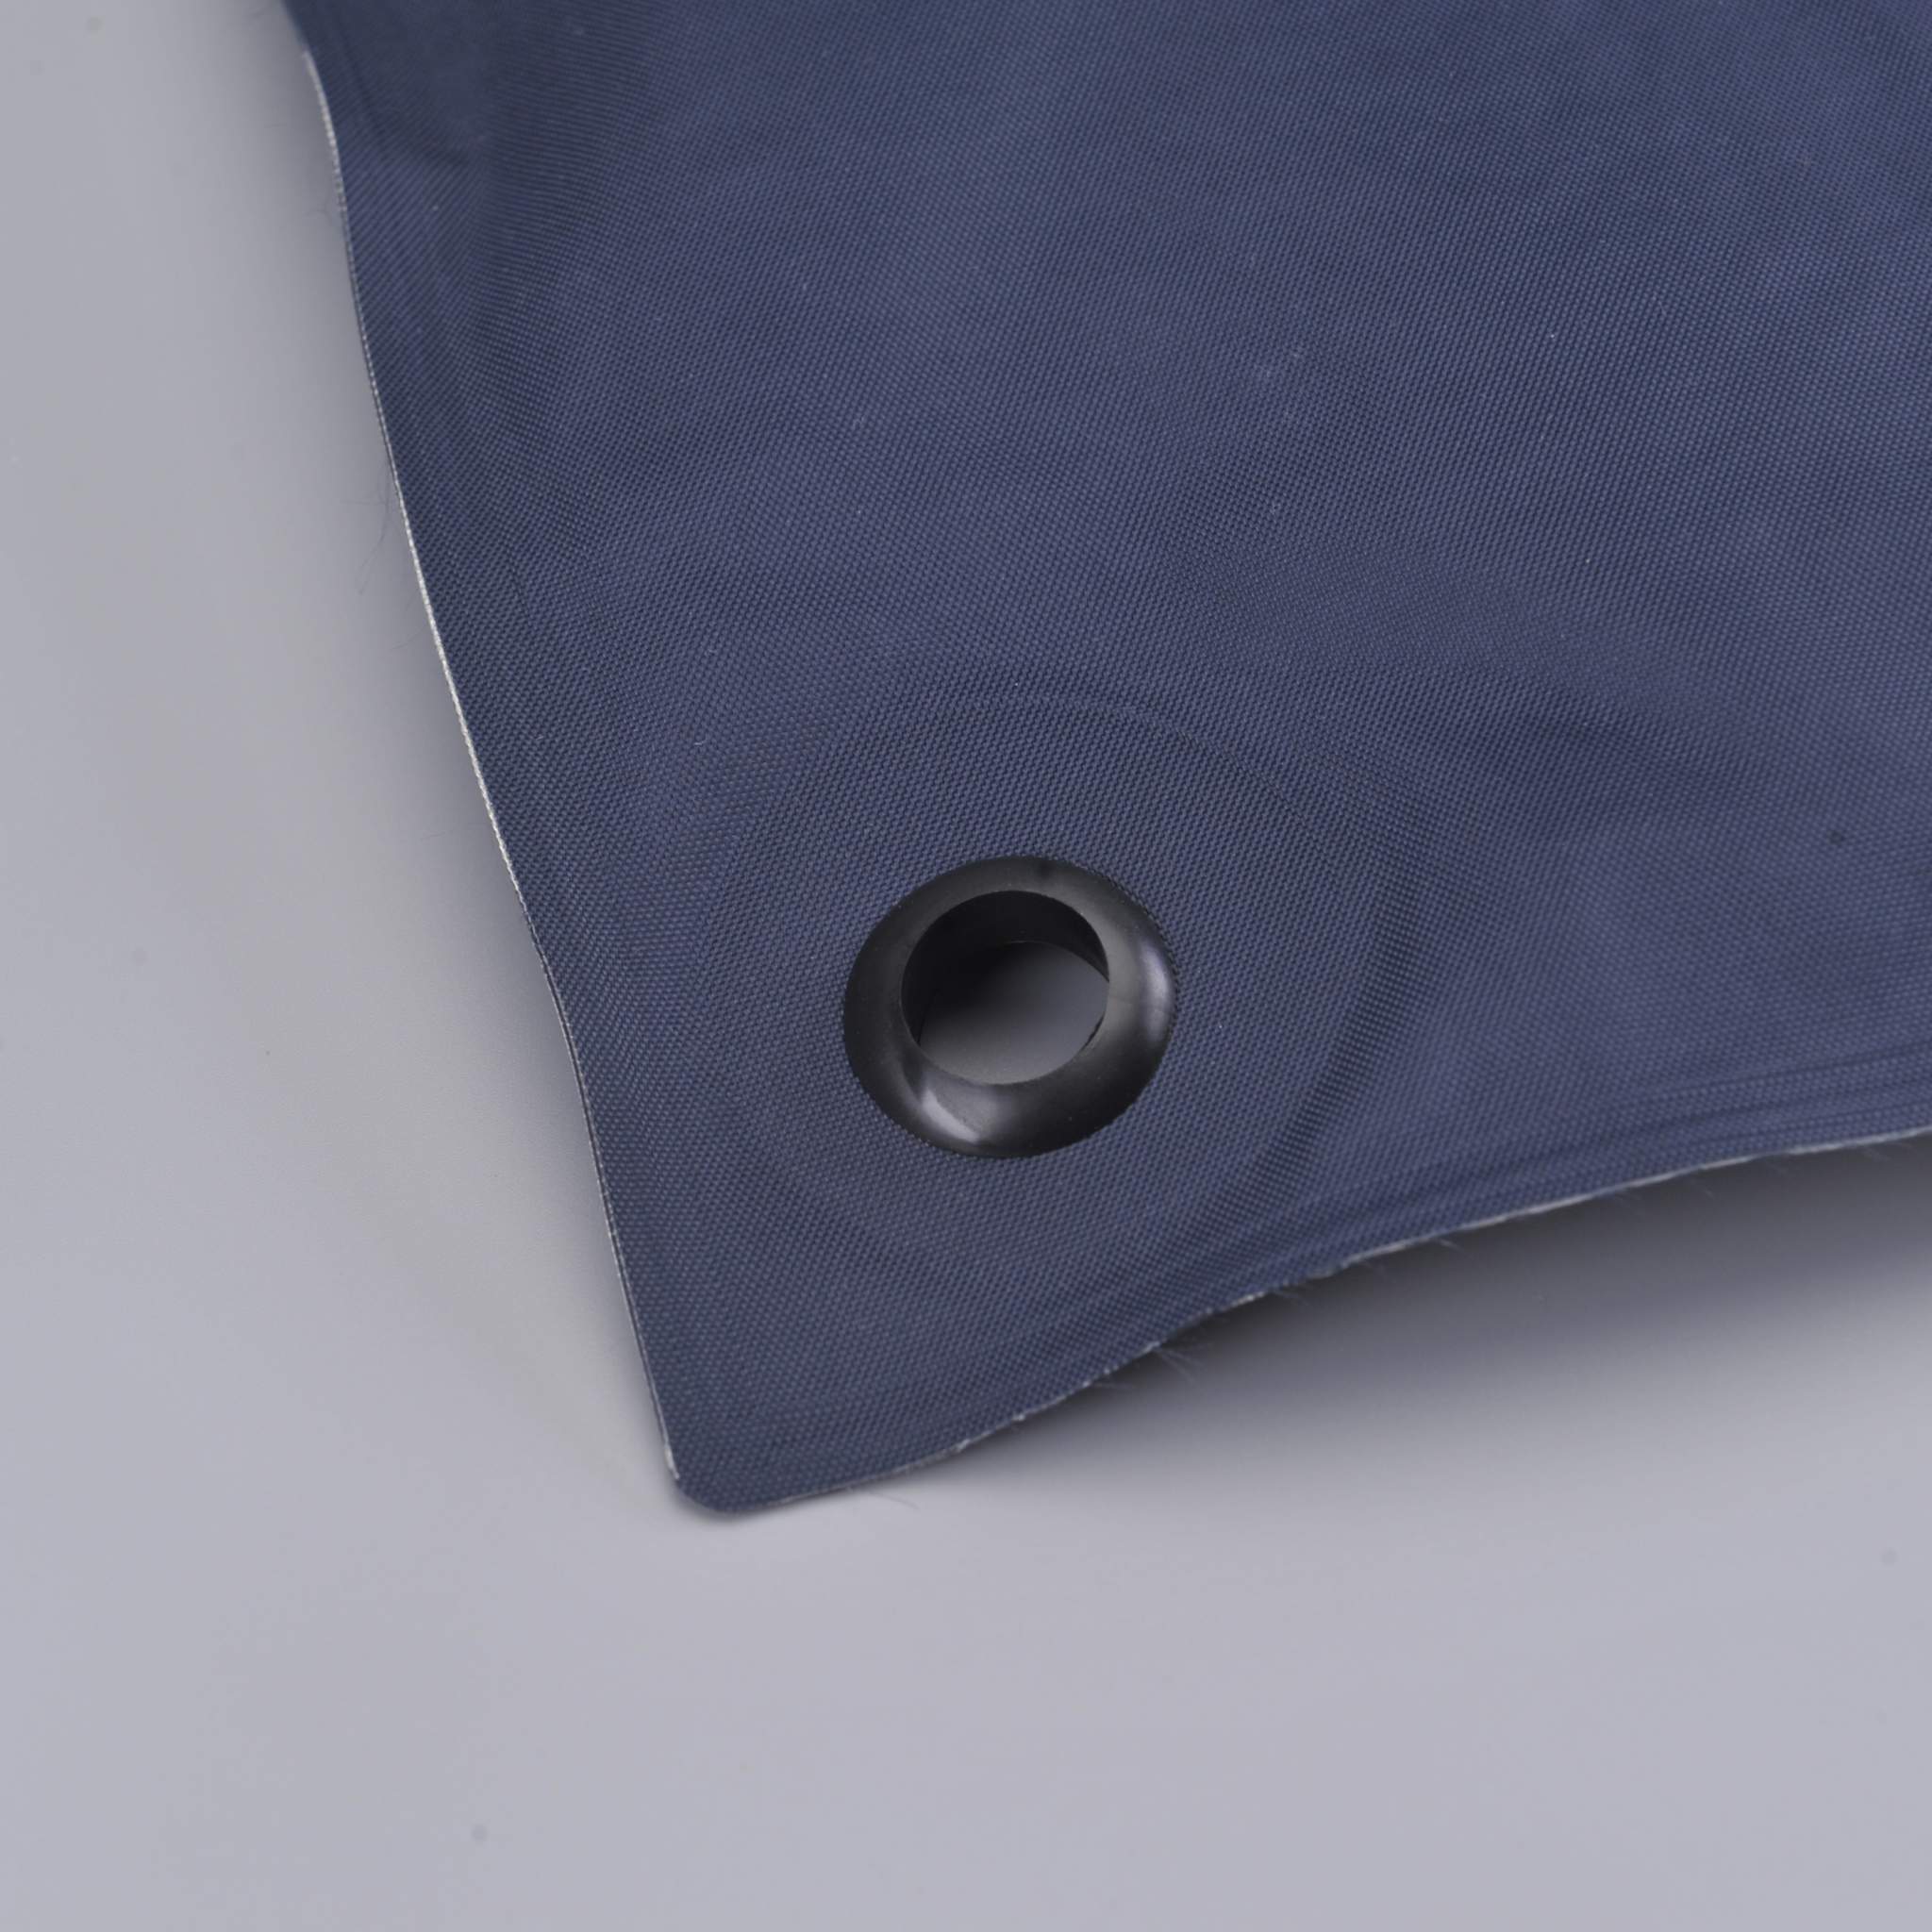 Meicen T-Shaped Vacuum Bags